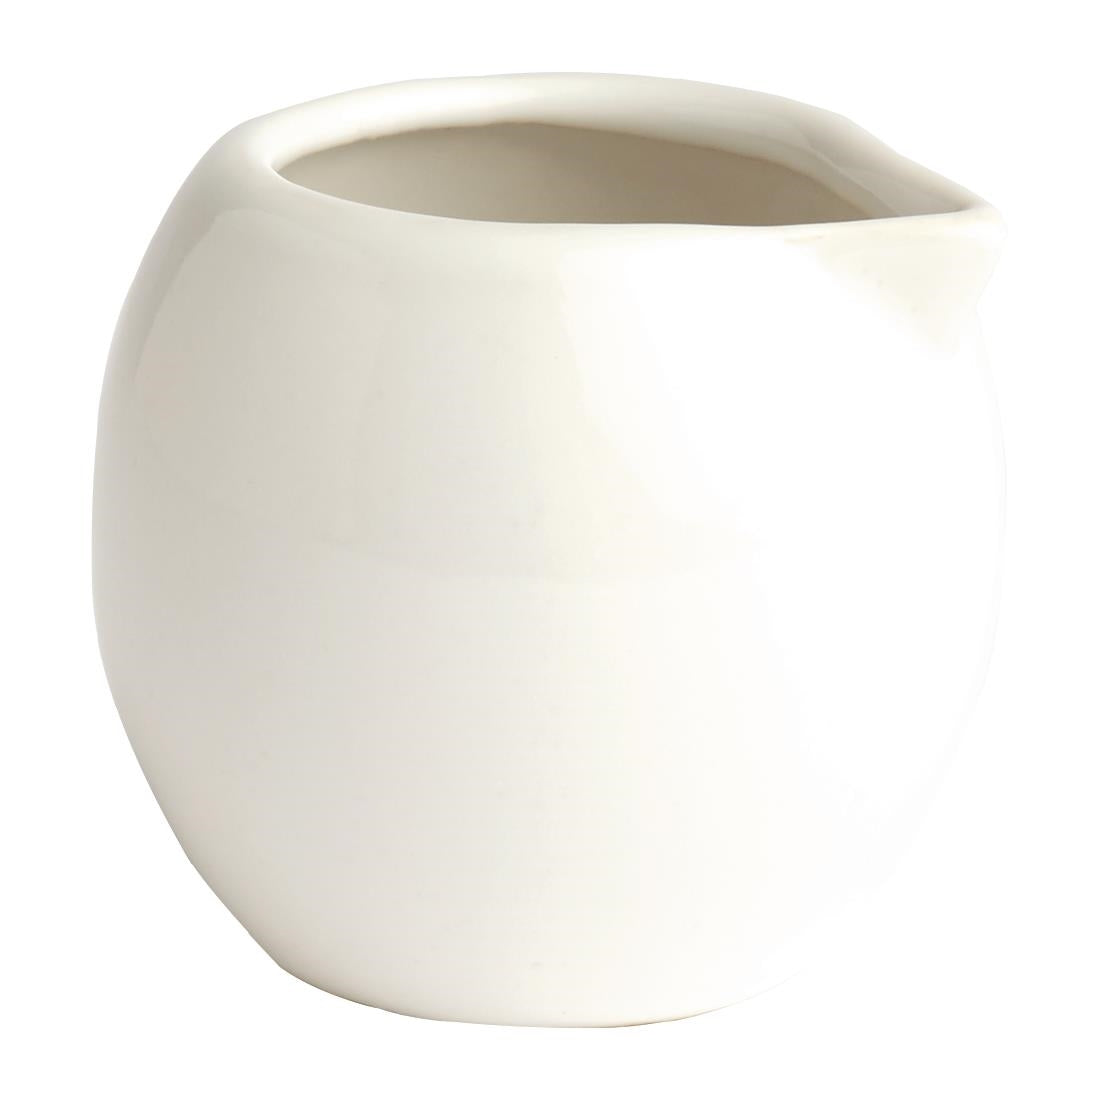 CM754 Olympia Cafe Milk Jug White 70ml (Pack of 6)